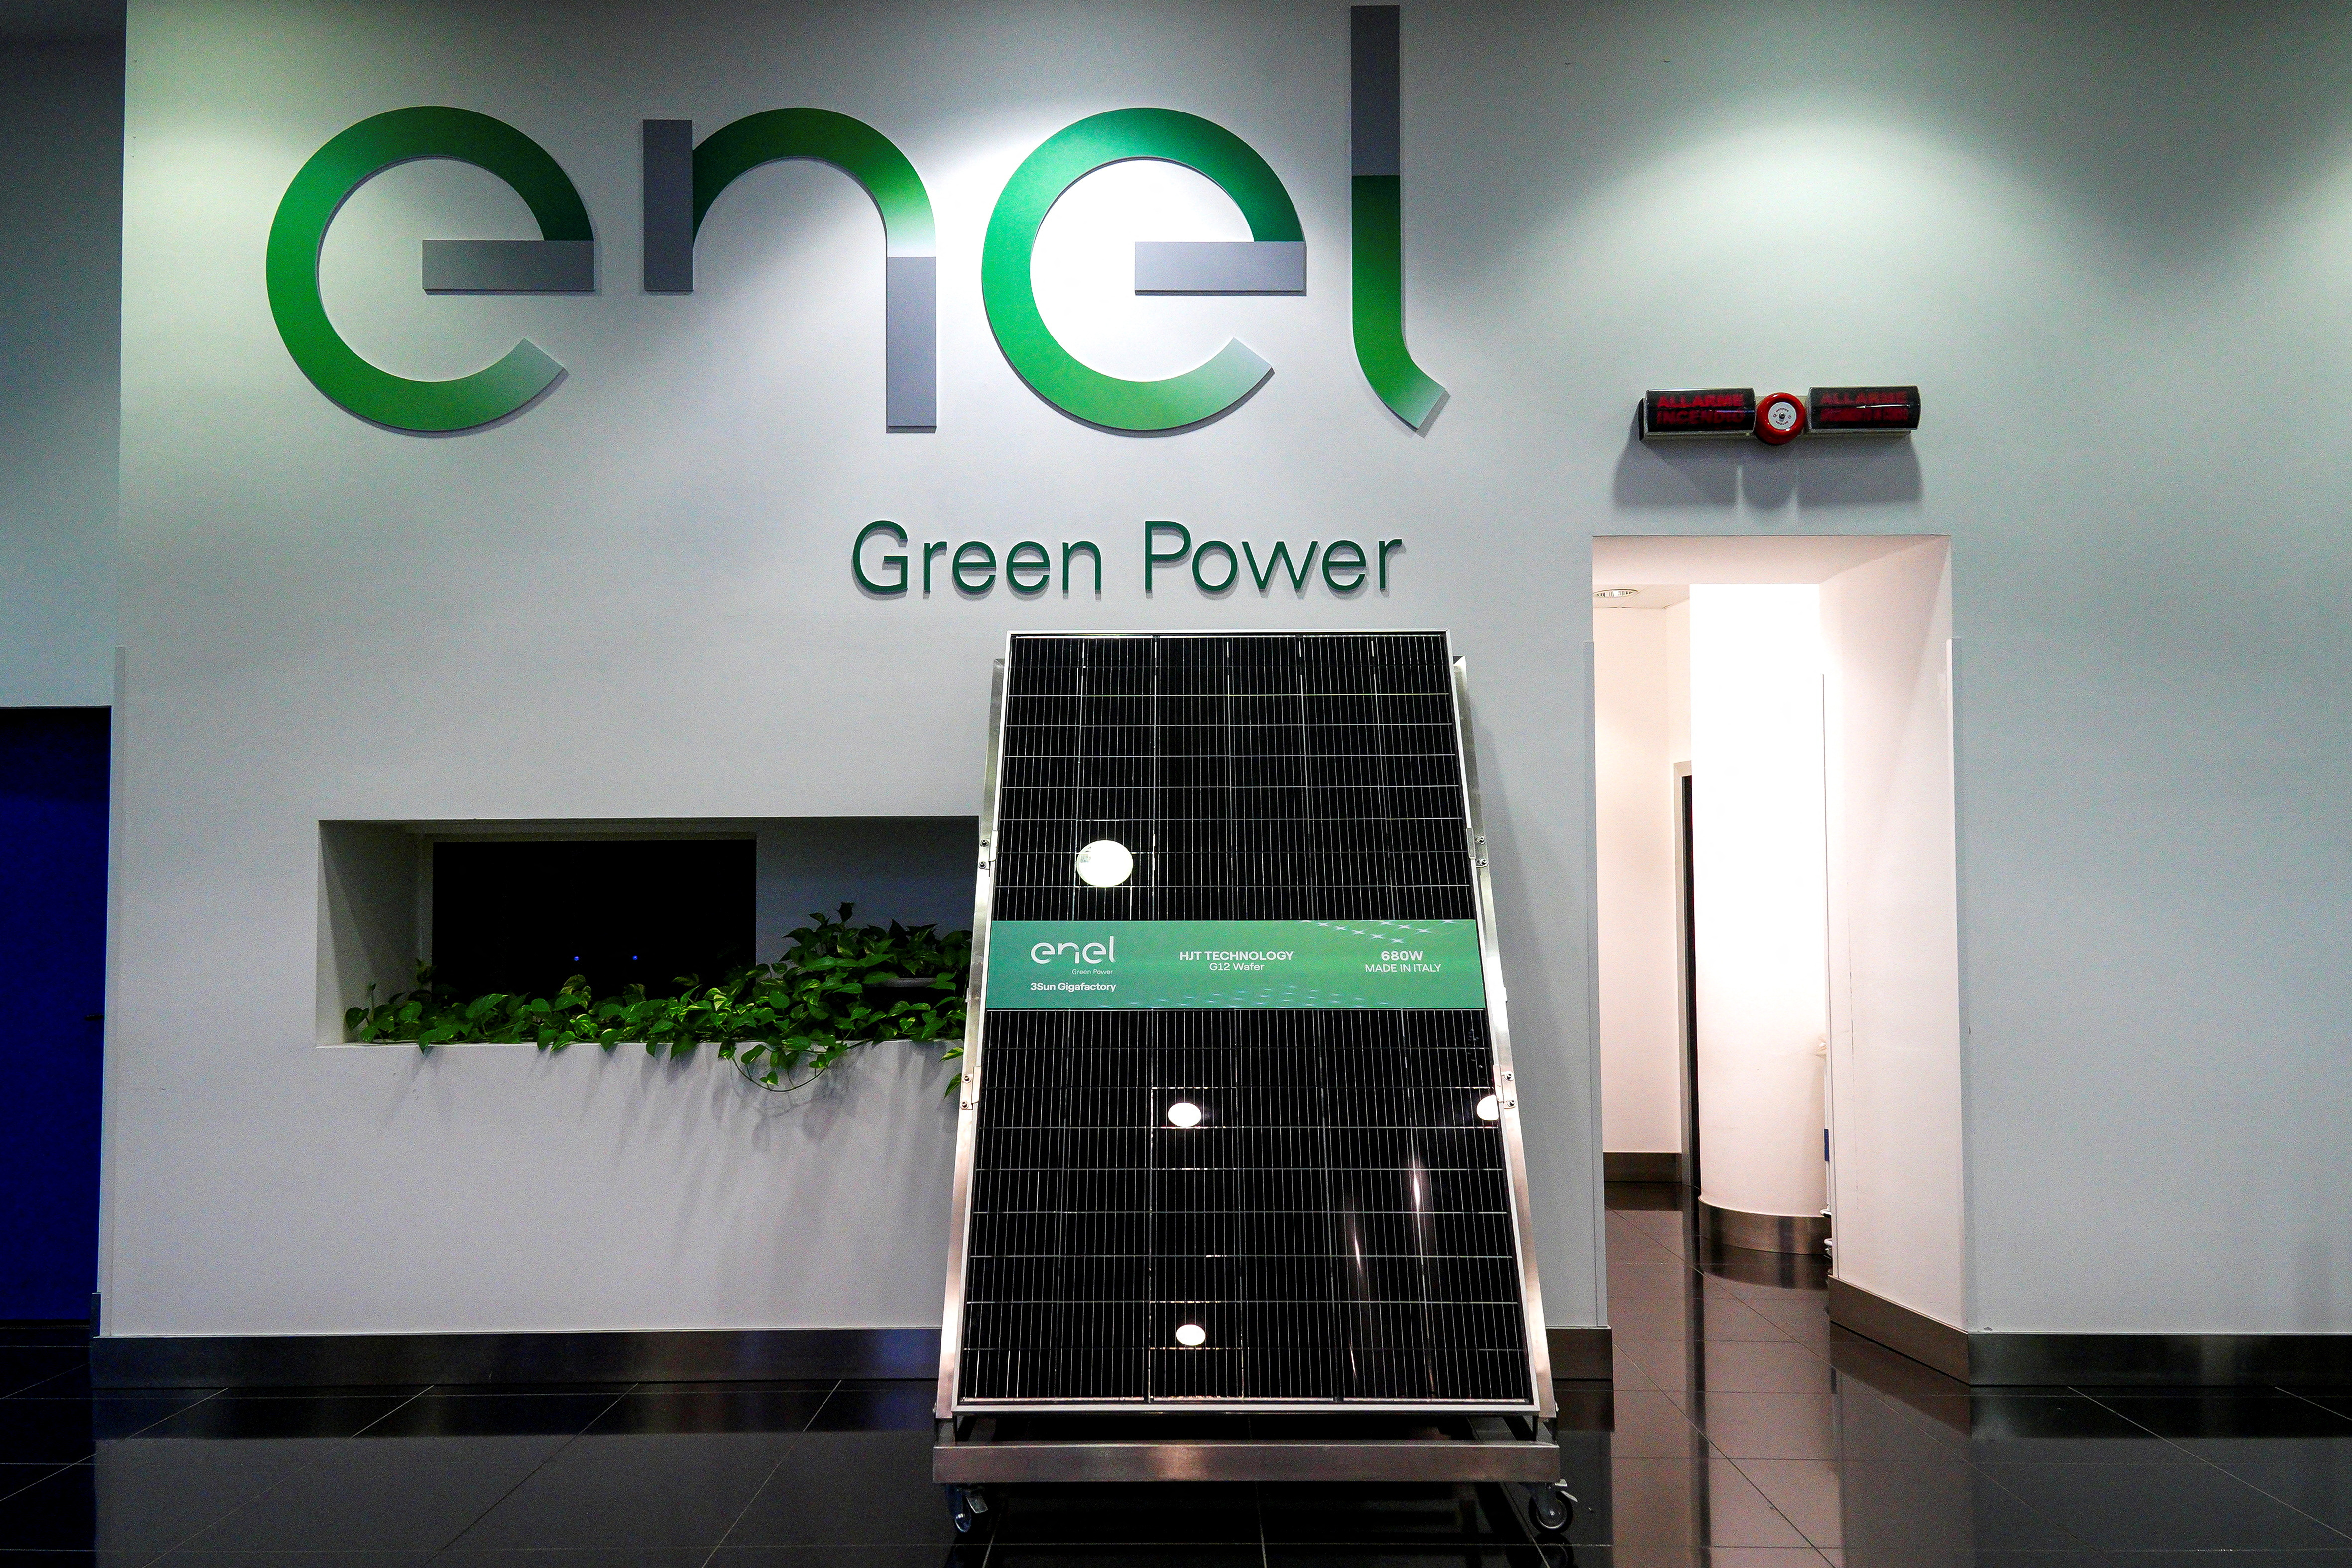 Europe's biggest utility Enel is scaling up a solar panel gigafactory it owns in Sicily to make it Europe's largest maker of bifacial photovoltaic (PV) modules and ward off the risk of dependency on China